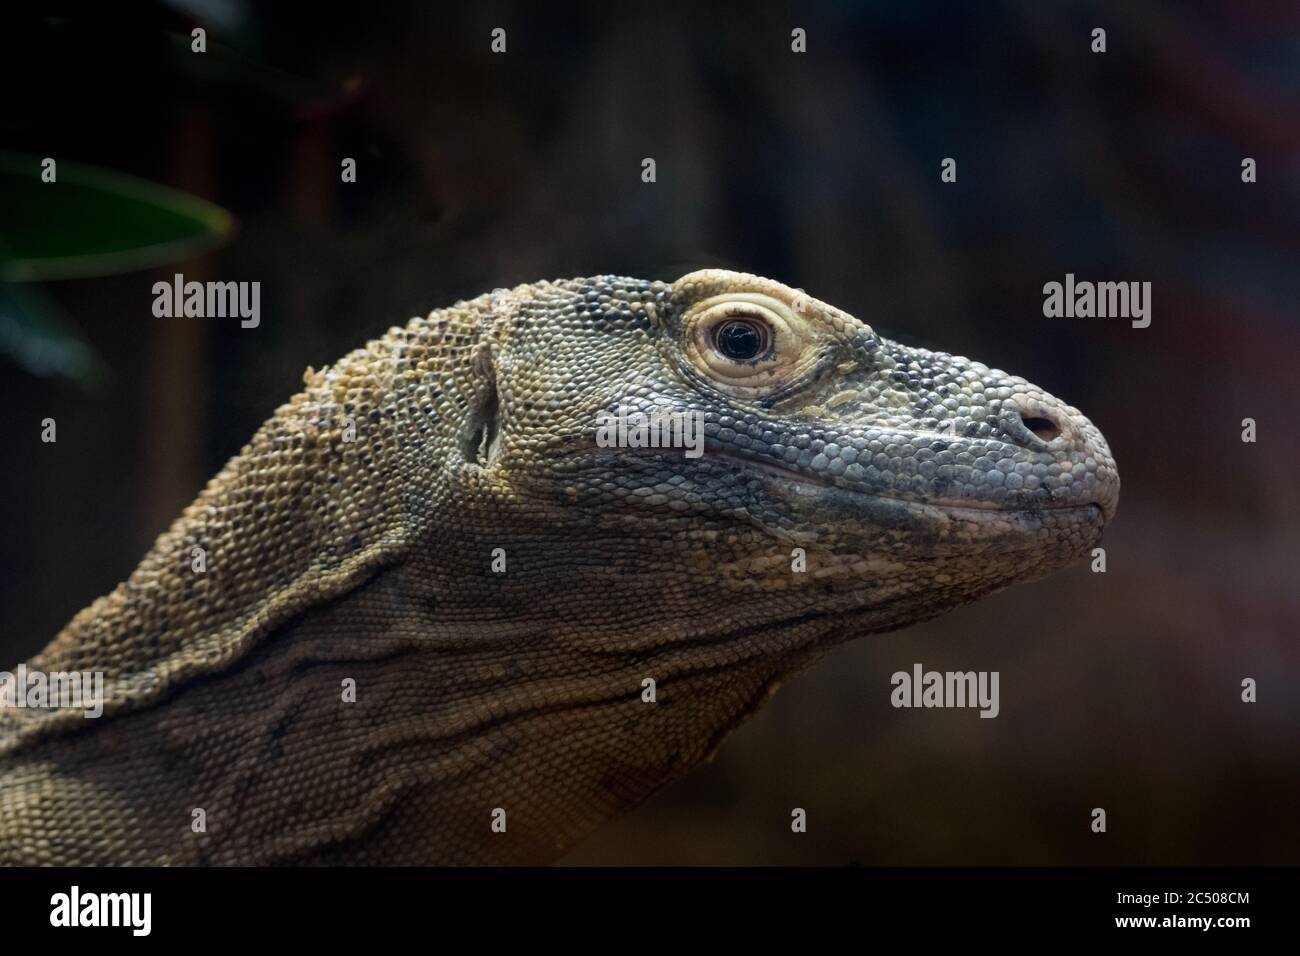 Close up of the head of a Komodo Dragon. Stock Photo